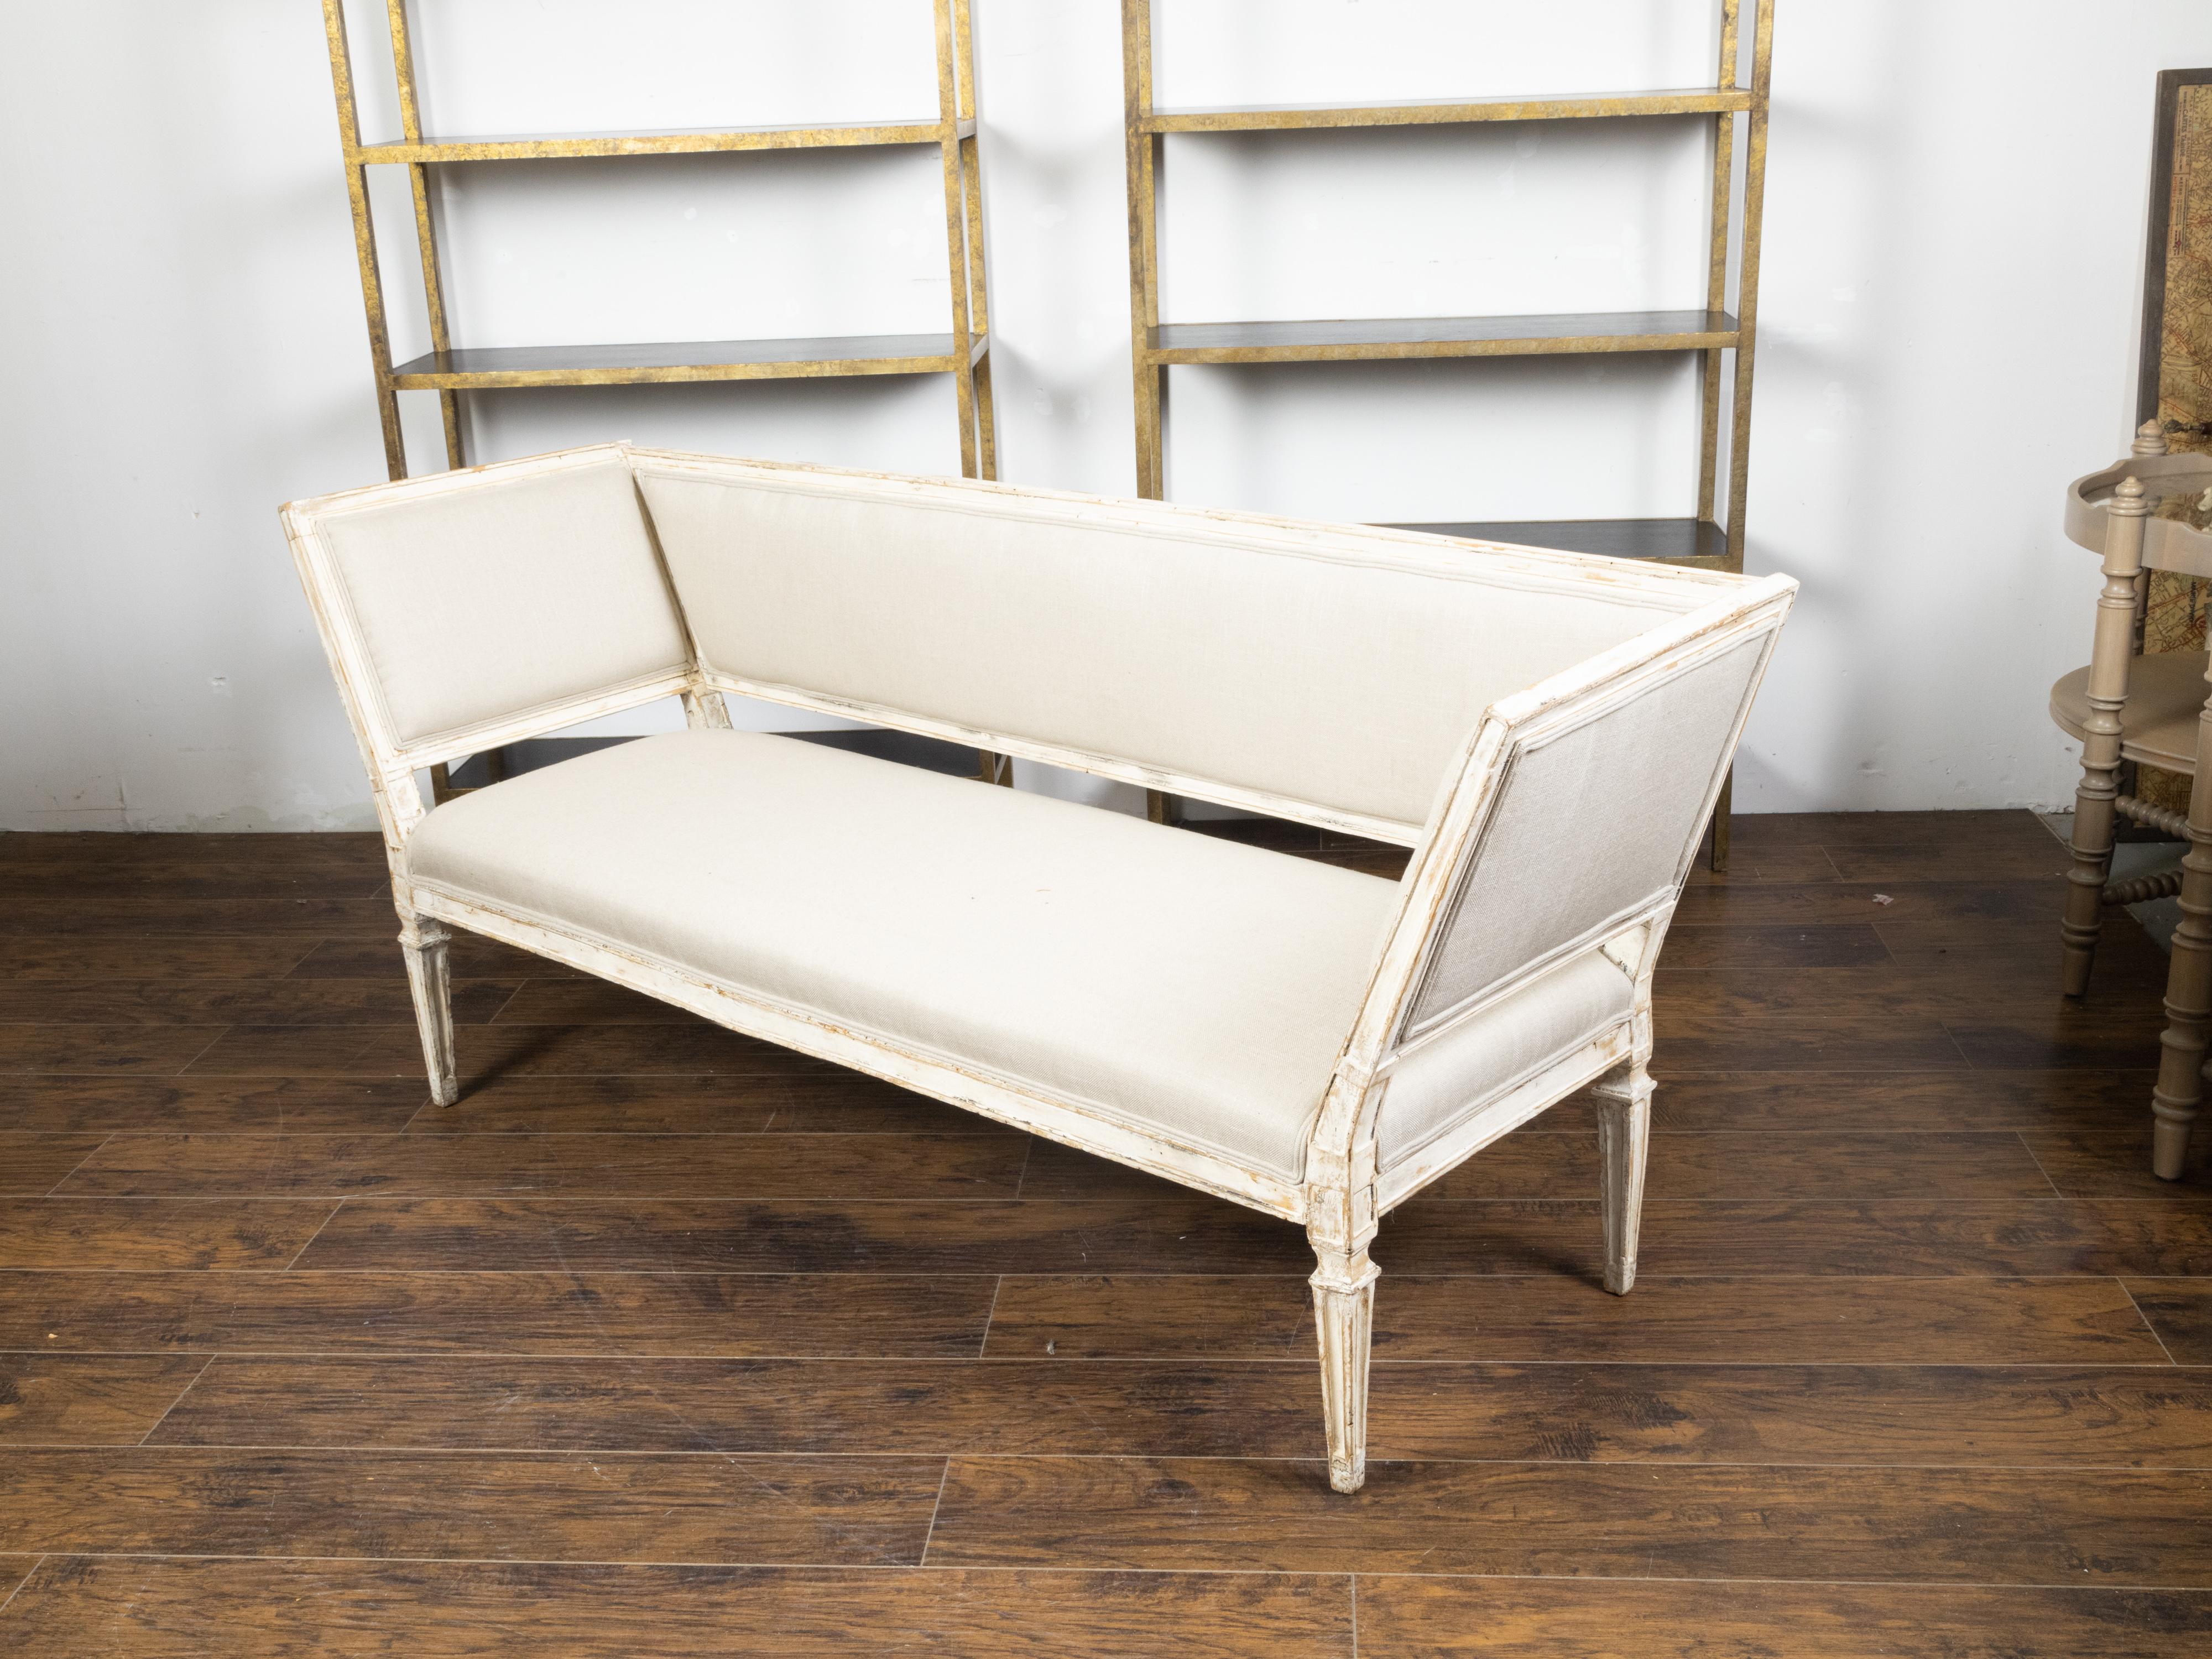 Italian 19th Century White Painted Sofa with Slanted Sides and Distressed Patina For Sale 3